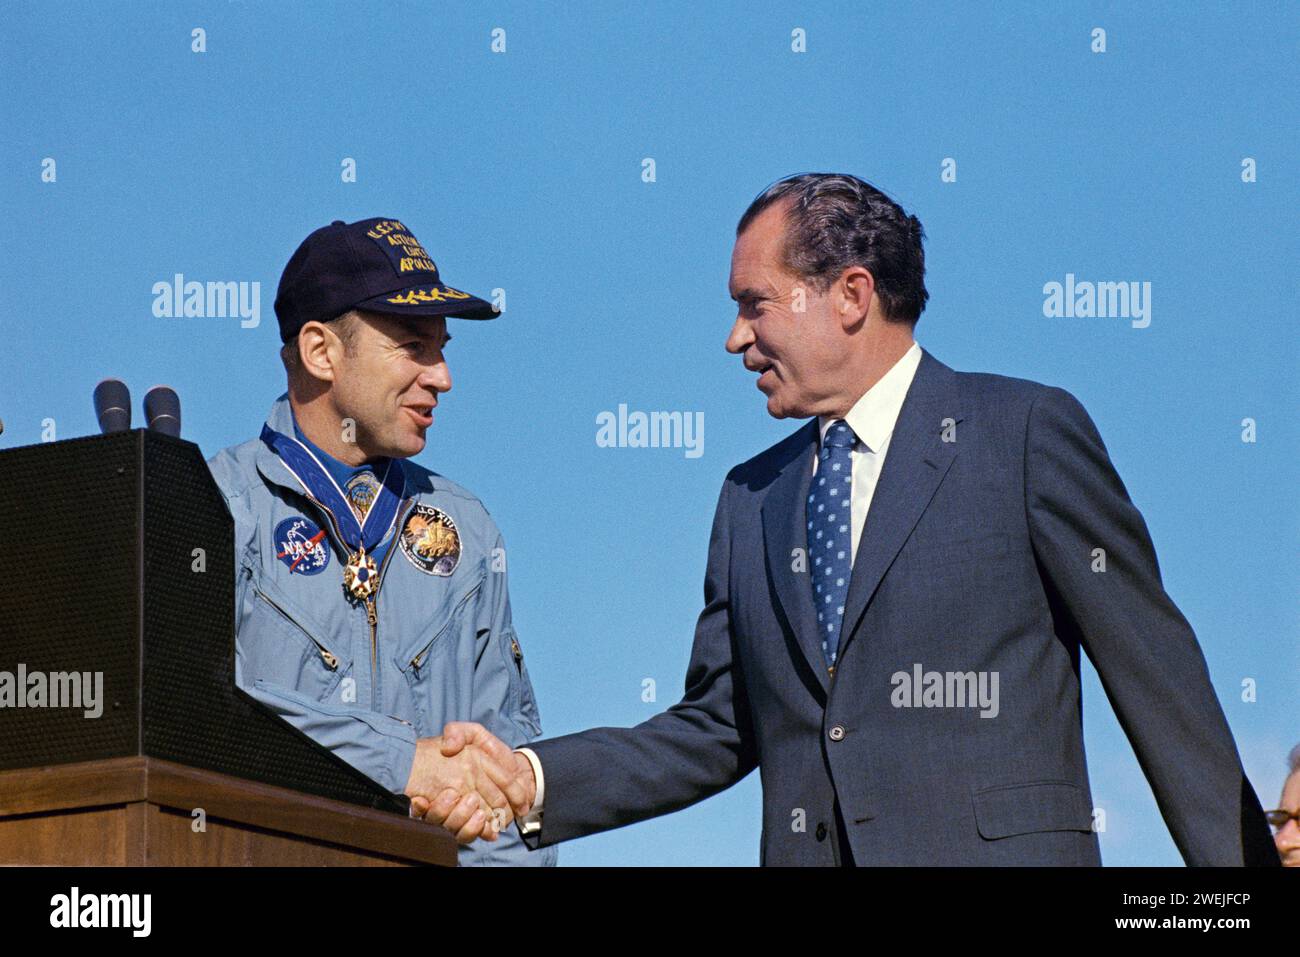 U.S. President Richard M. Nixon and astronaut James A. Lovell Jr., Apollo 13 commander, shaking hands at special ceremony to present Apollo 13 crew with Presidential Medal of Freedom, the nation's highest civilian honor, Hickam Air Force Base, Hawaii, USA, NASA, April 18, 1970 Stock Photo